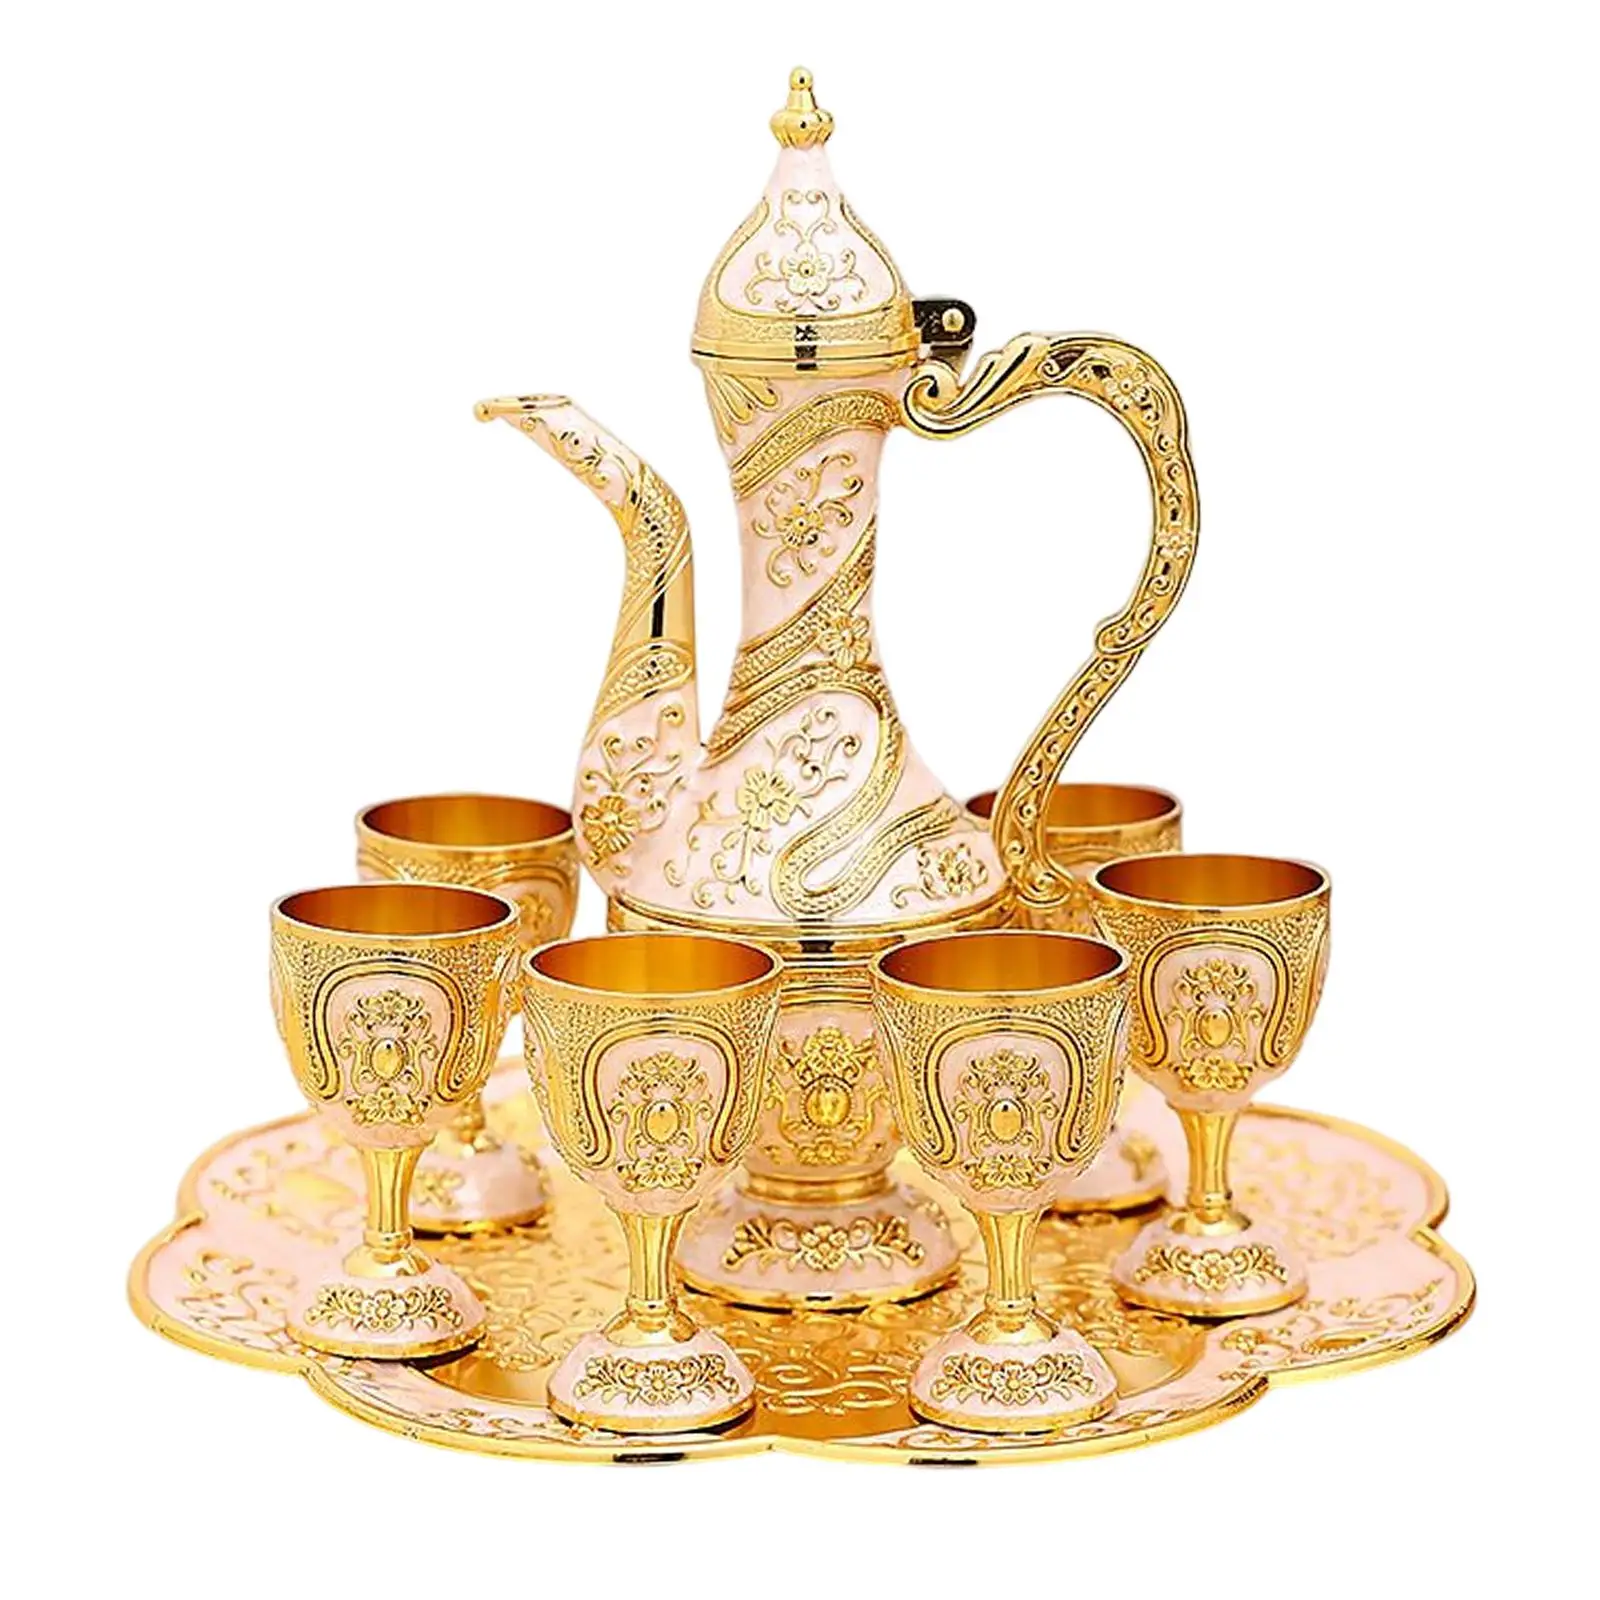 Turkish Coffee Pot Set Tea Sets with Teapot Tray and 6 Cups Art Crafts Turkish Cup Set Flagon for Serving Tea Party Gifts